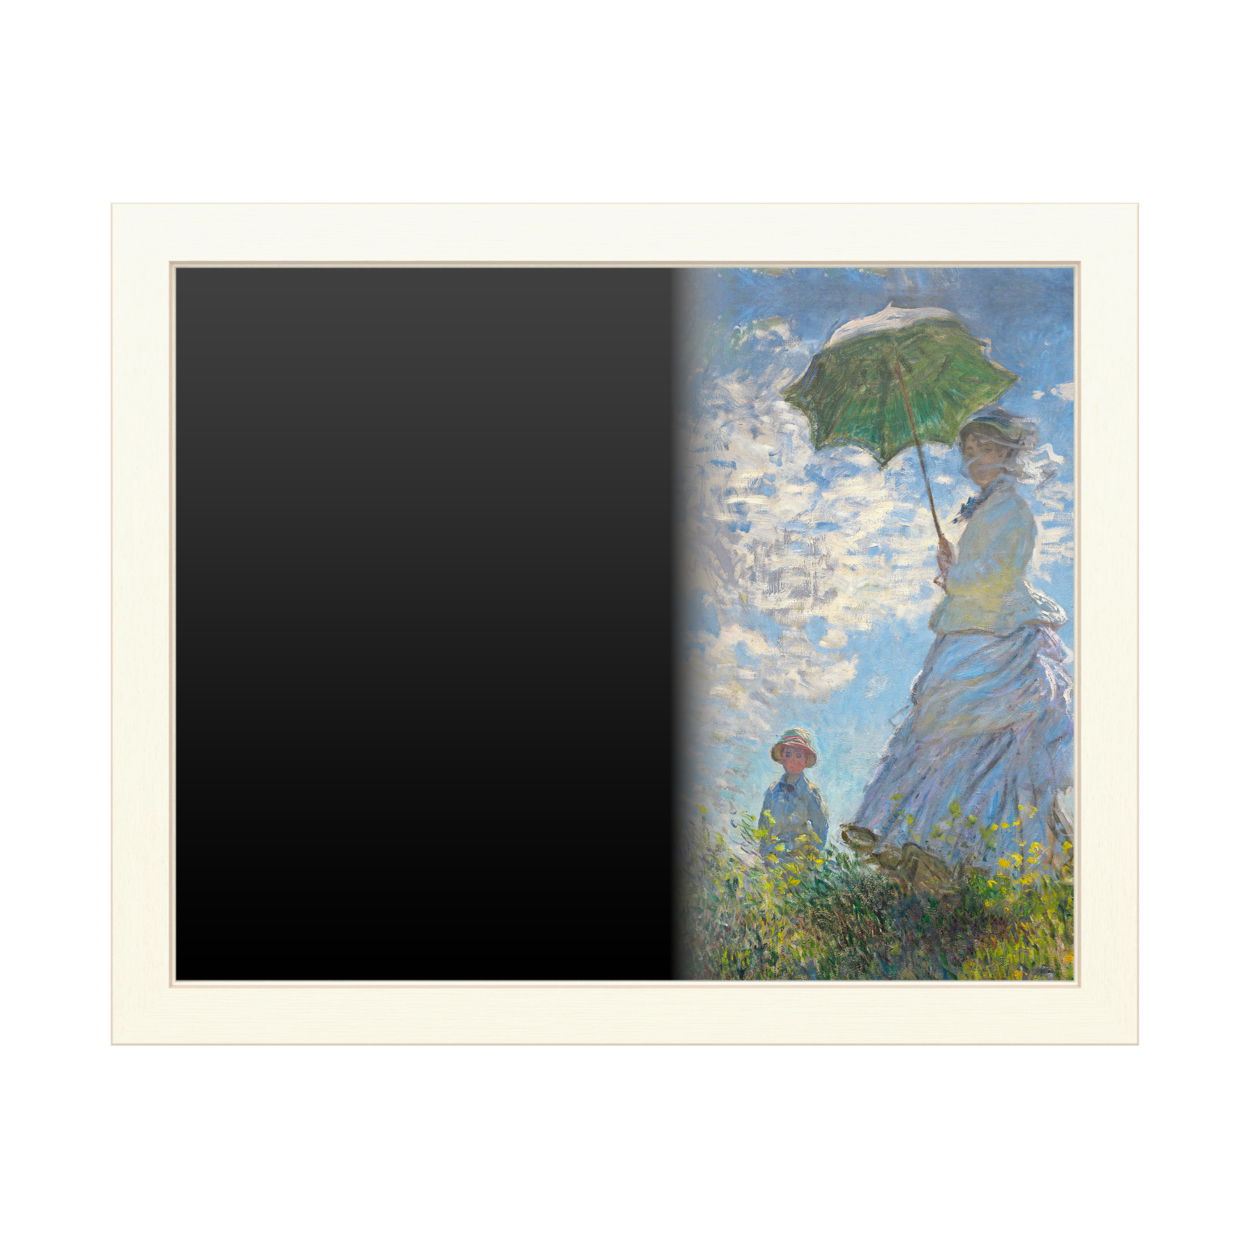 16 X 20 Chalk Board With Printed Artwork - Claude Monet Woman With A Parasol 1875 White Board - Ready To Hang Chalkboard